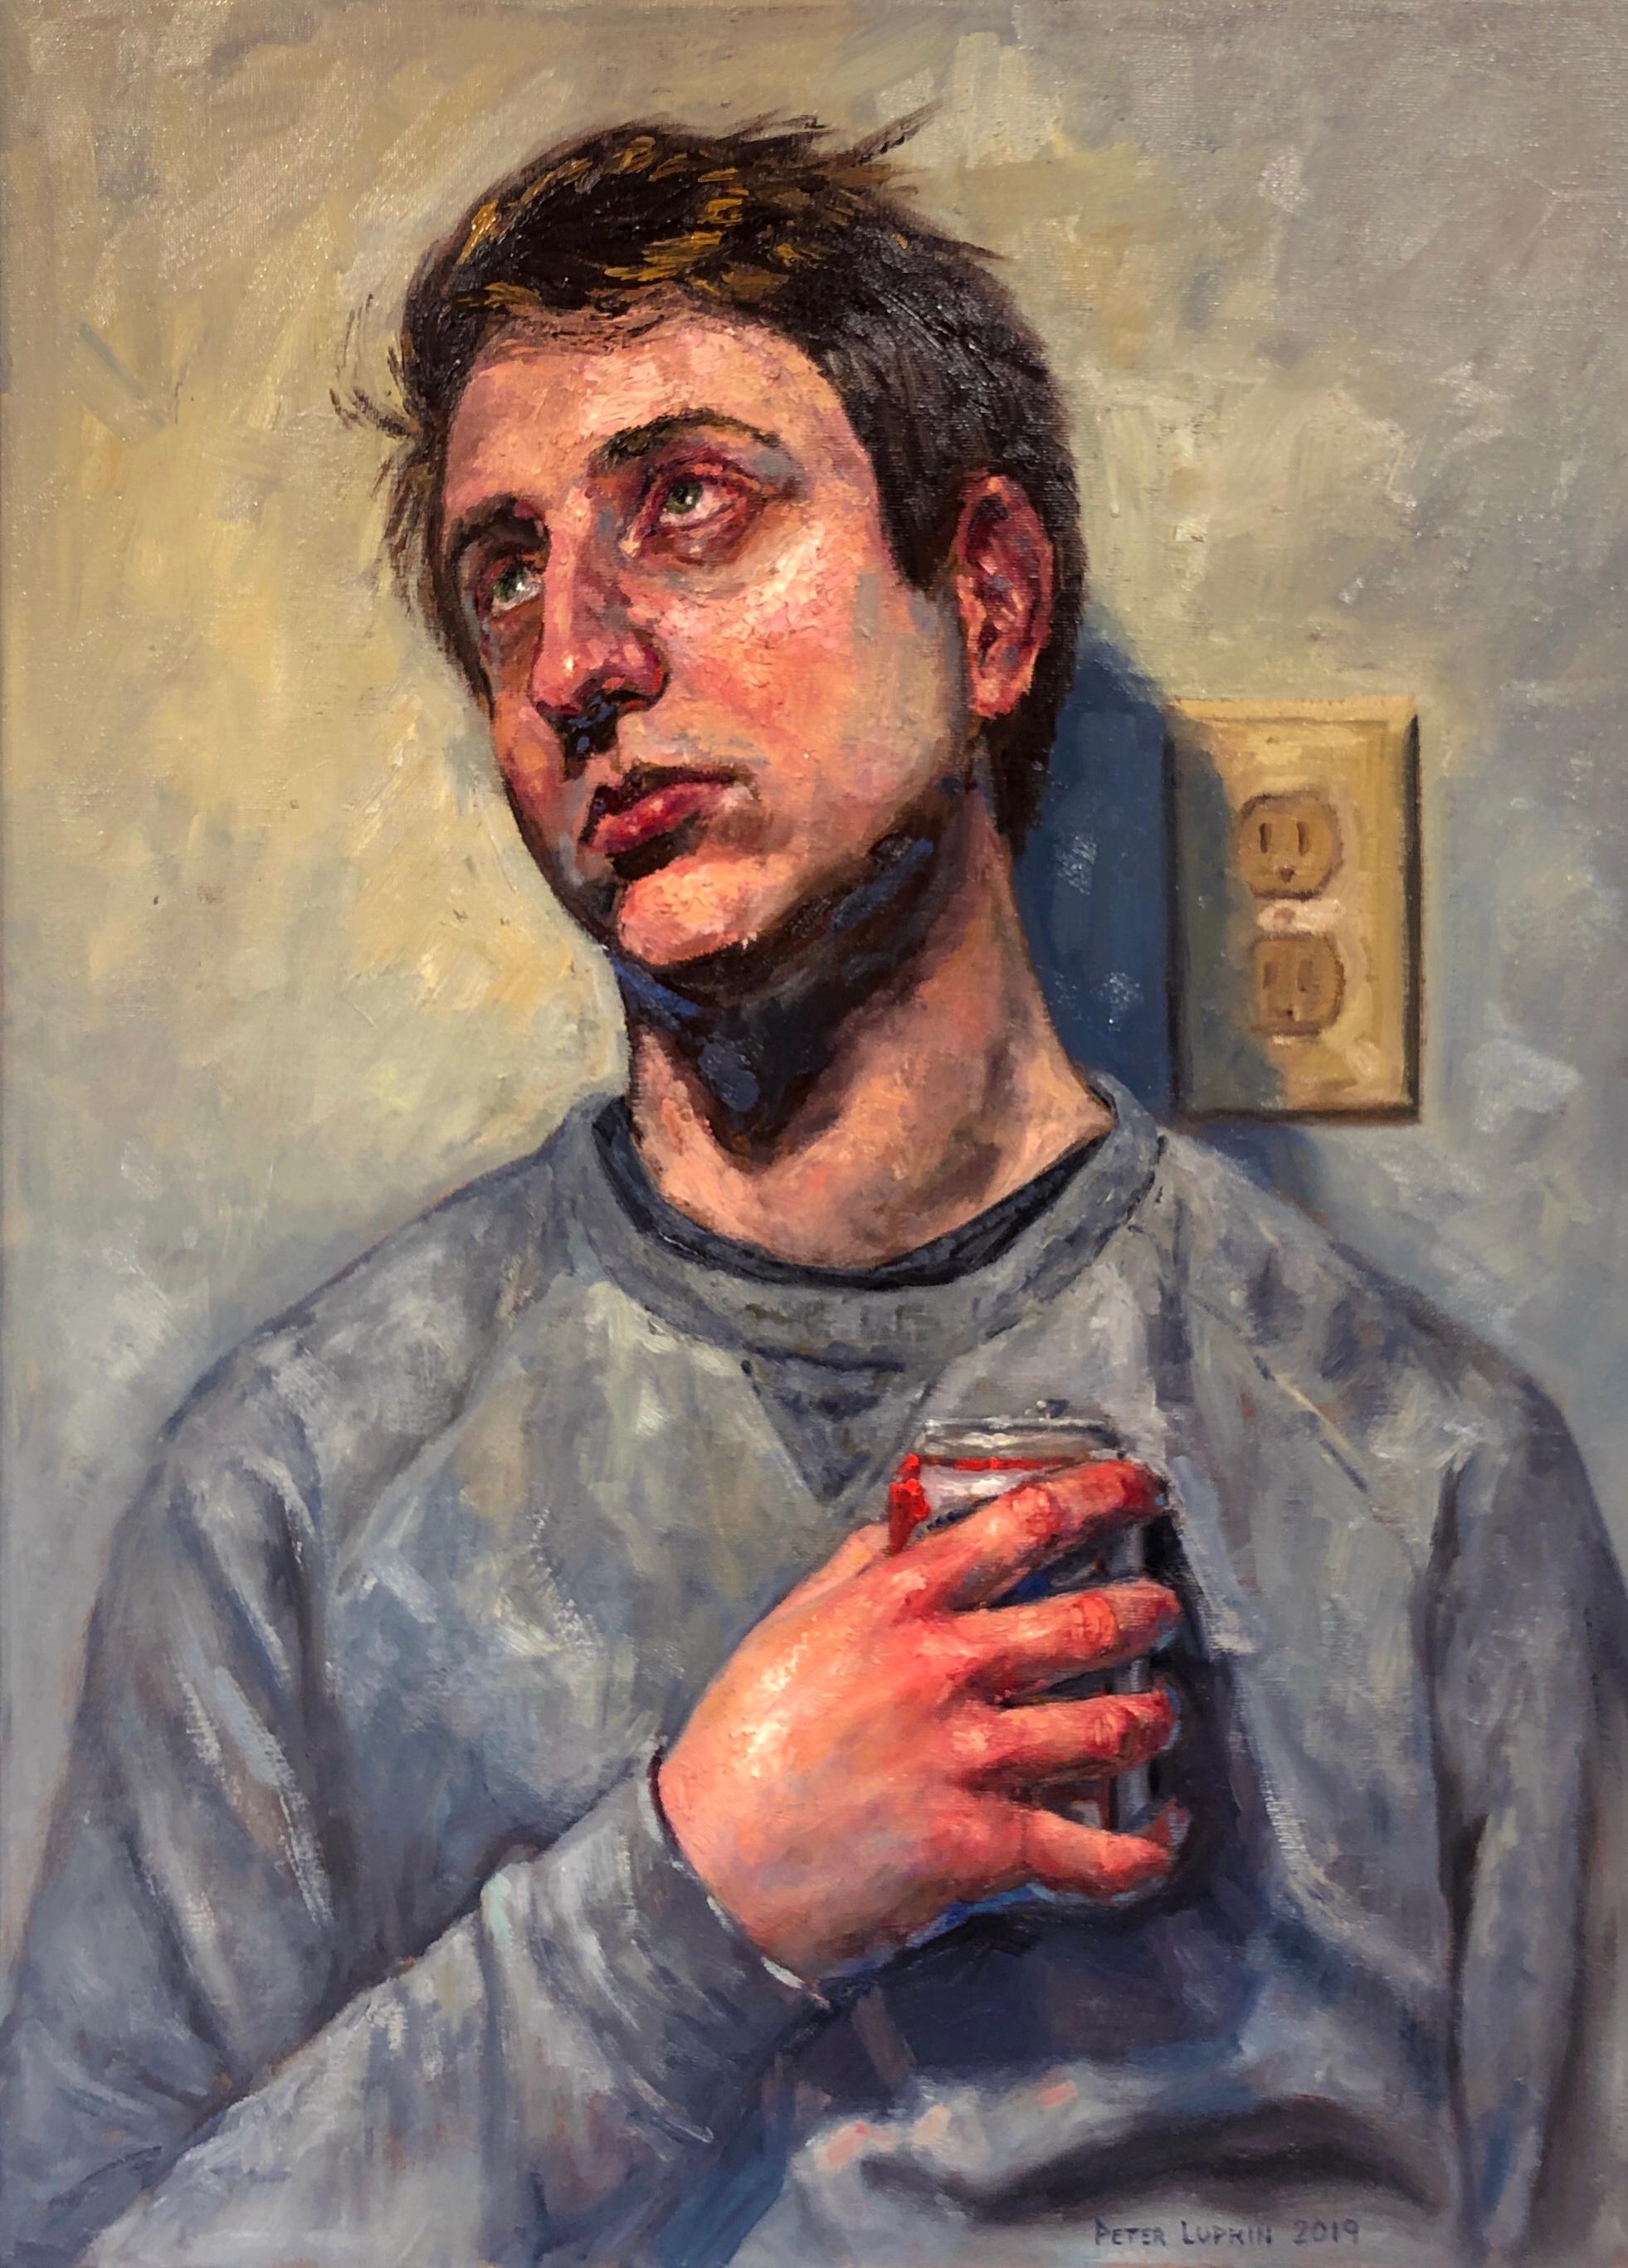 Peter Lupkin Figurative Painting - Ecstasy in Grey, Male Portrait Gazing Upwards, Holding a Can of Beer.  Framed.